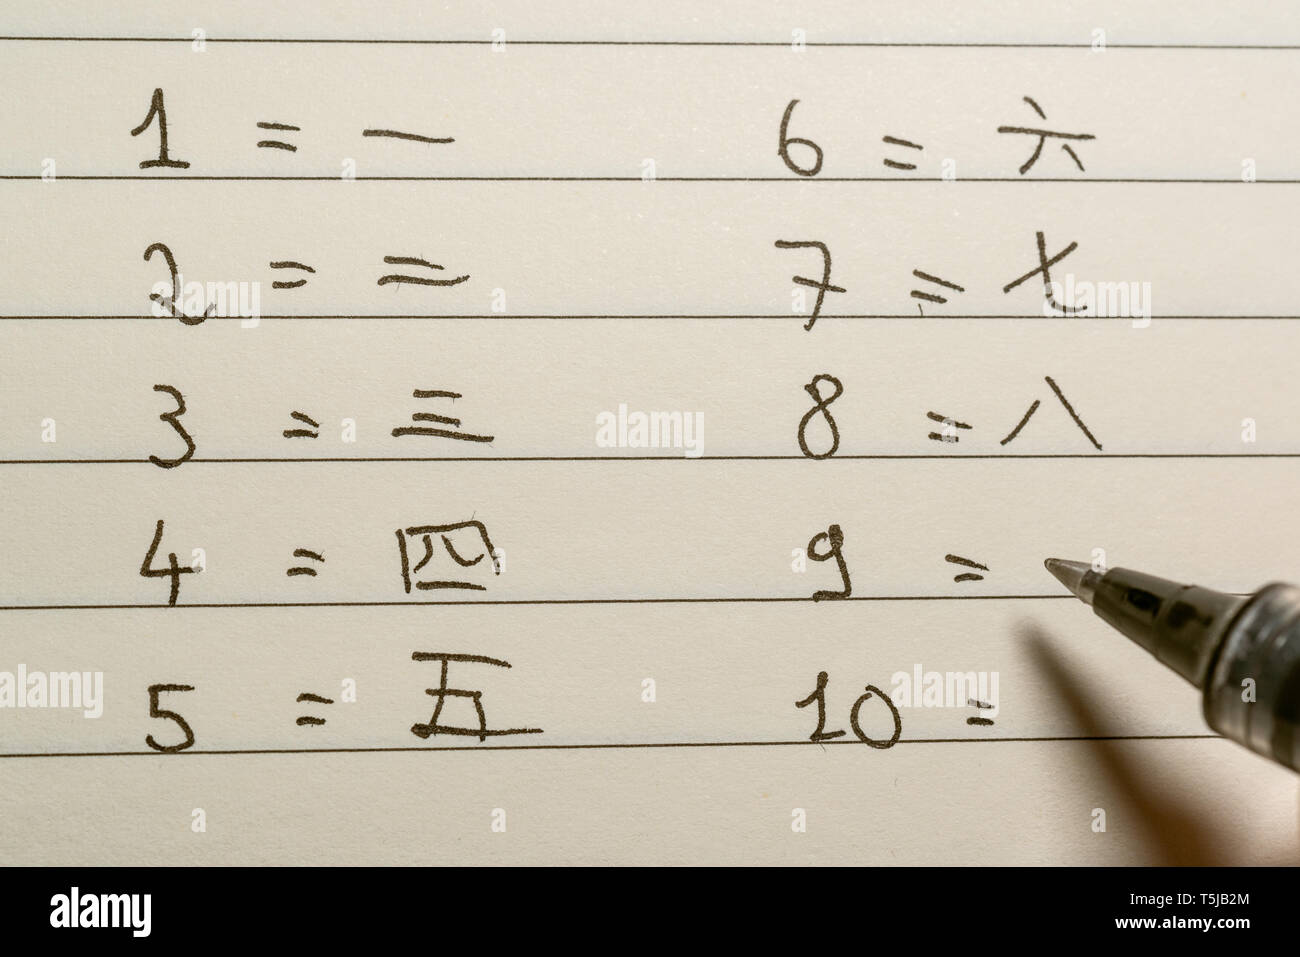 Beginner Chinese language learner writing numbers in Chinese characters on a notebook close-up shot Stock Photo